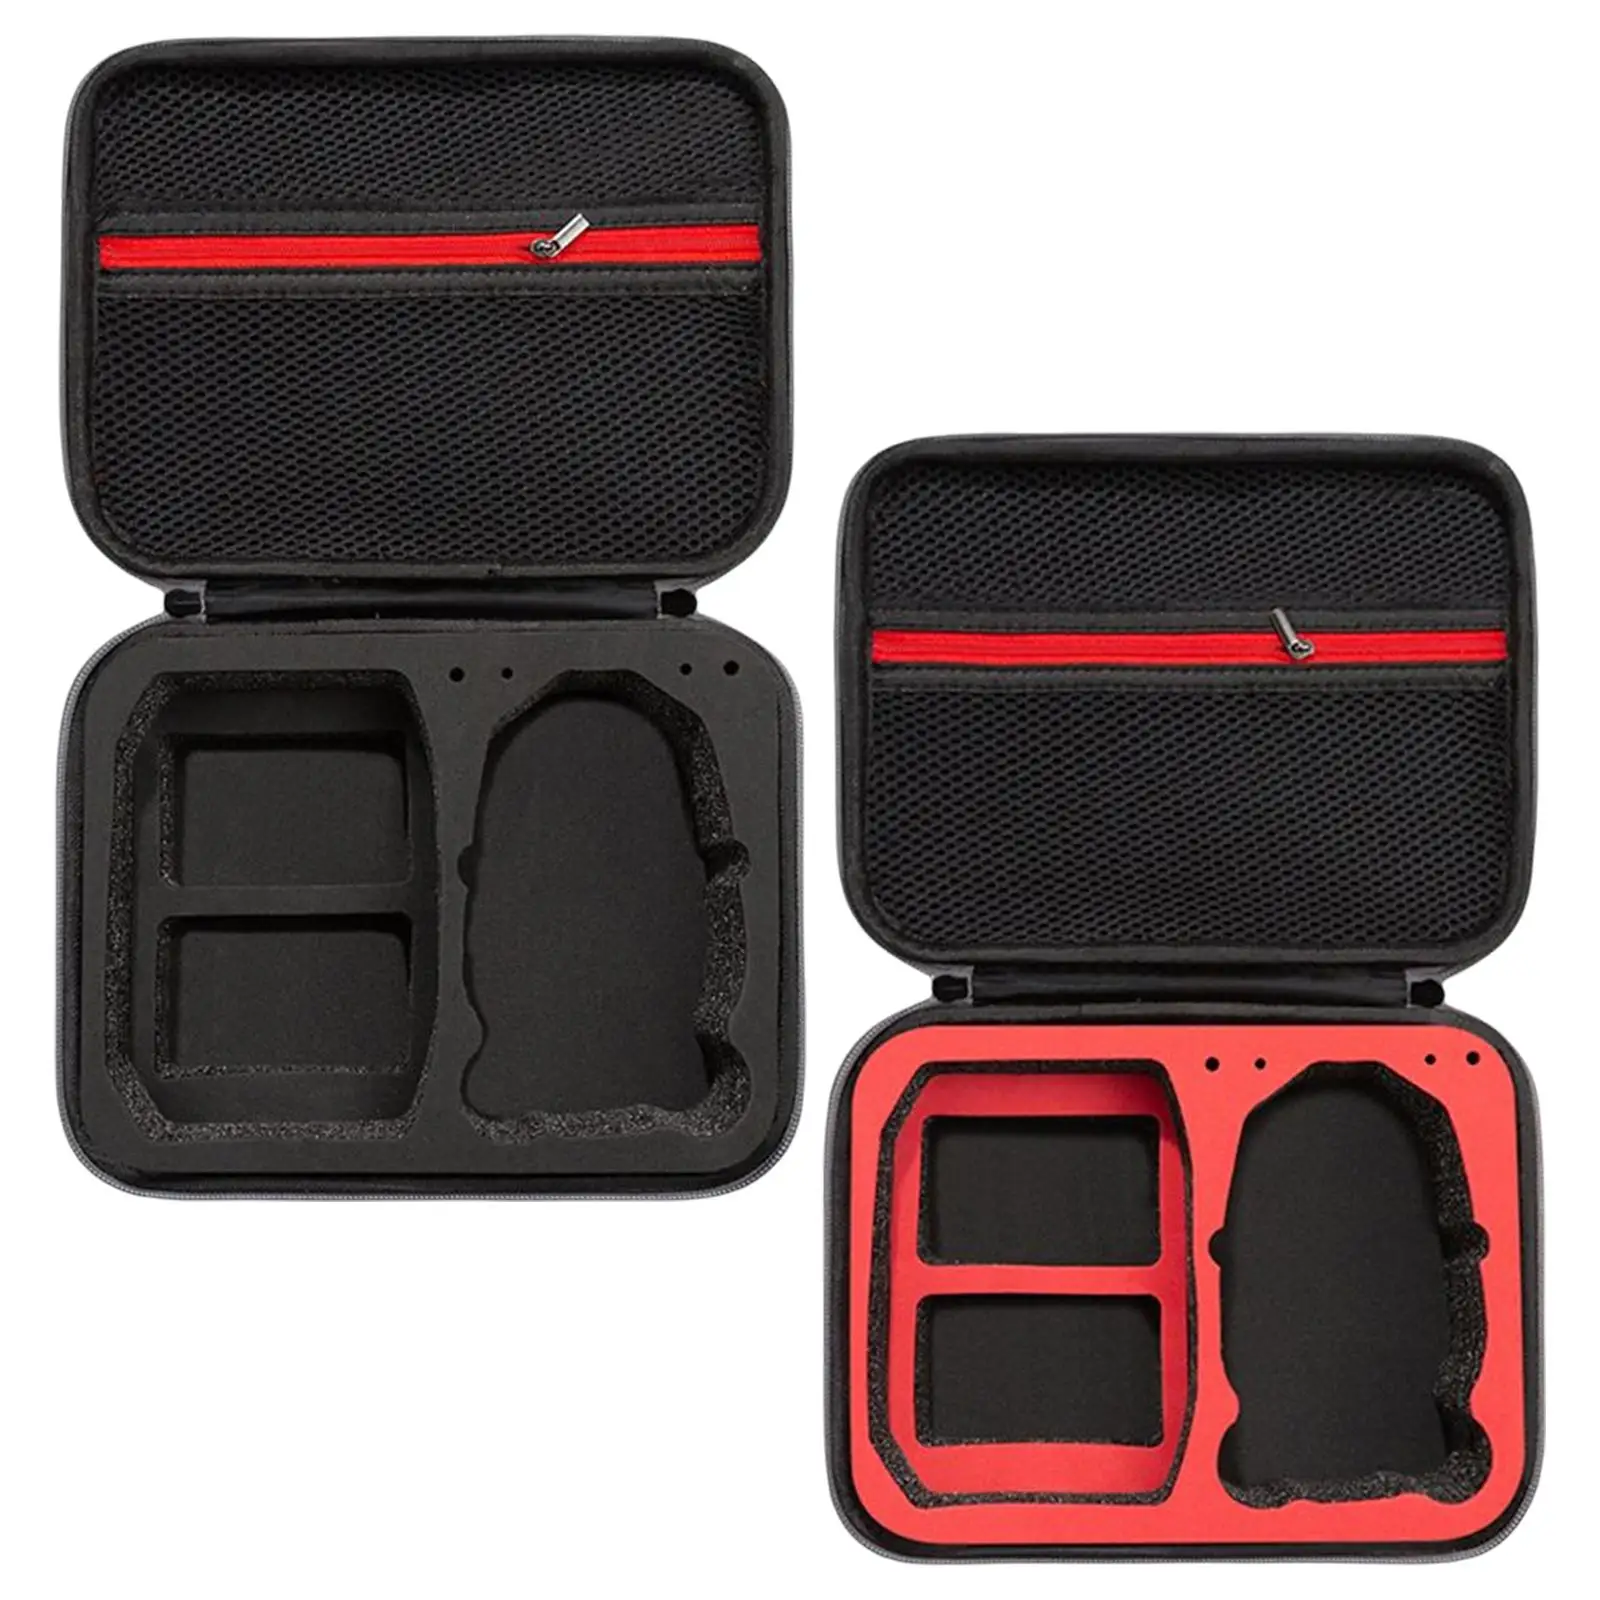 Portable Drone Carrying Case Travel Bag Wear Resistant Shockproof Storage Bag Protective Case for DJI Mini 3 Pro RC Drone Parts